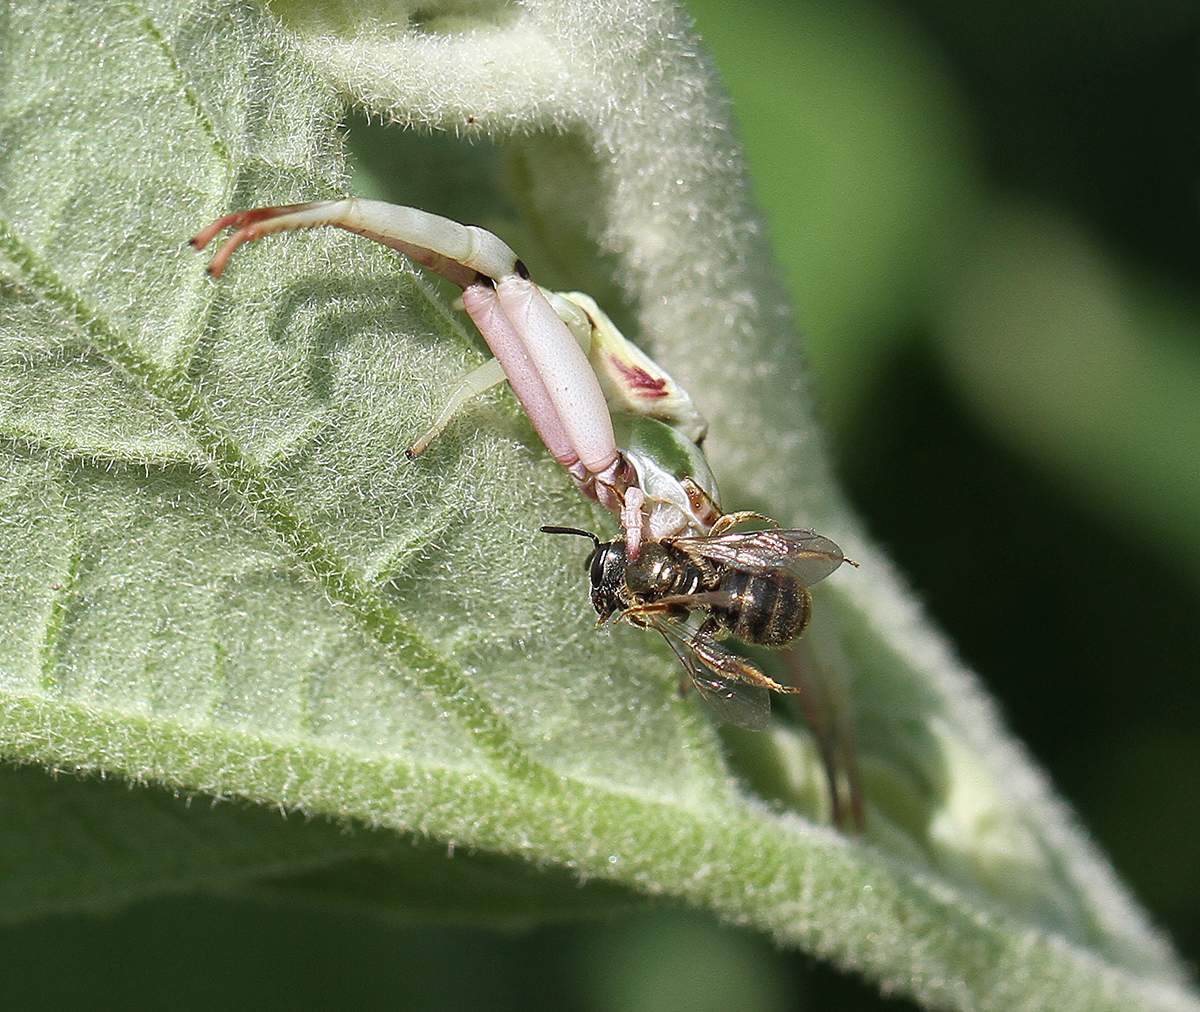 White-banded crab spider feeding on sweat bee